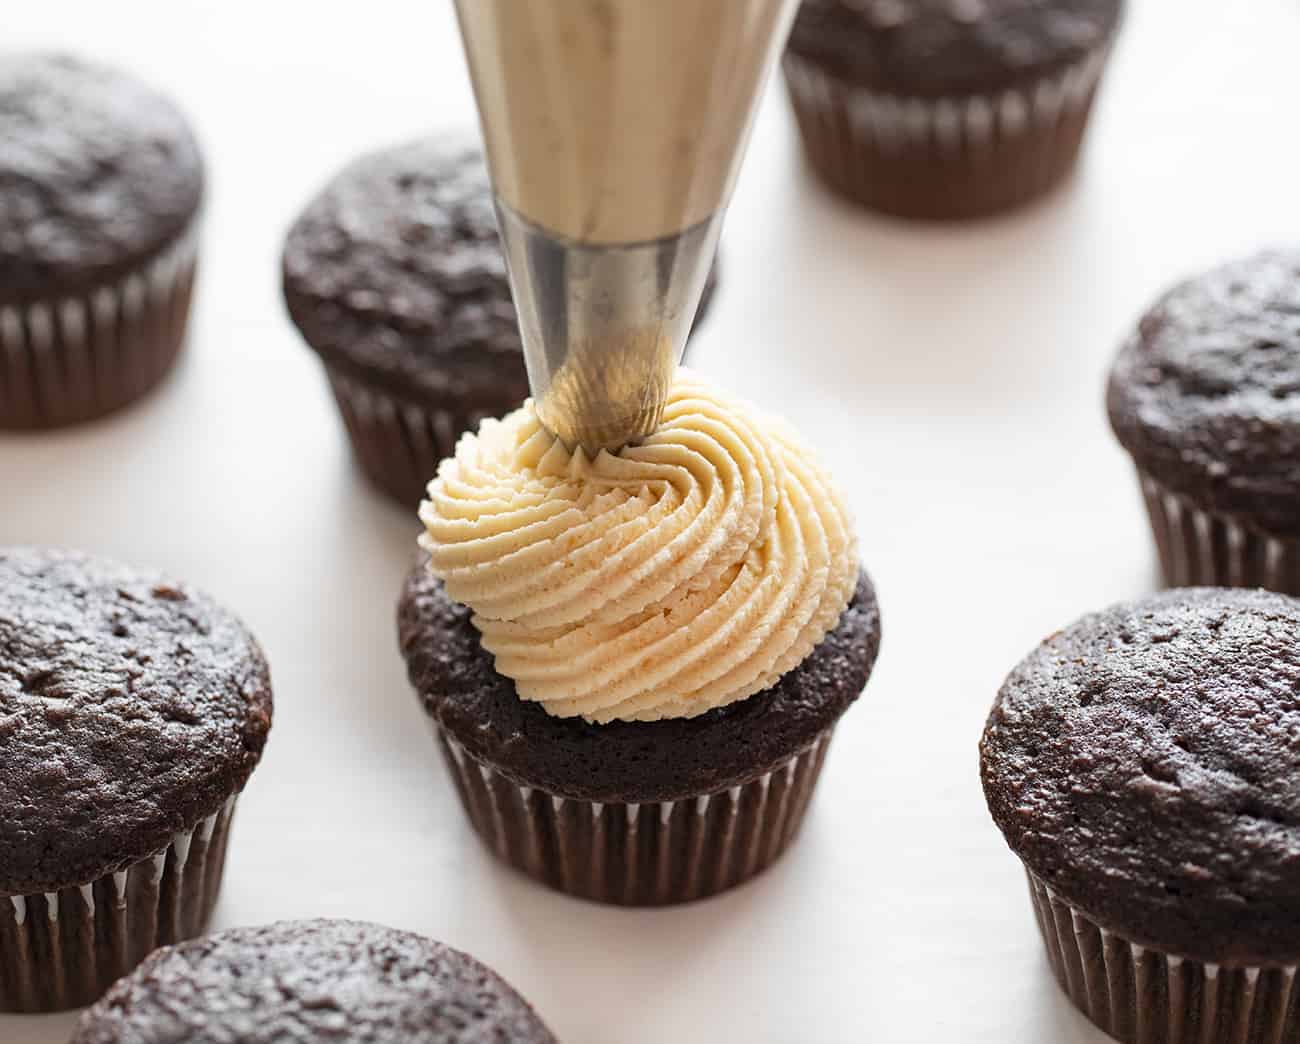 Piping Frosting onto Chocolate Cupcake